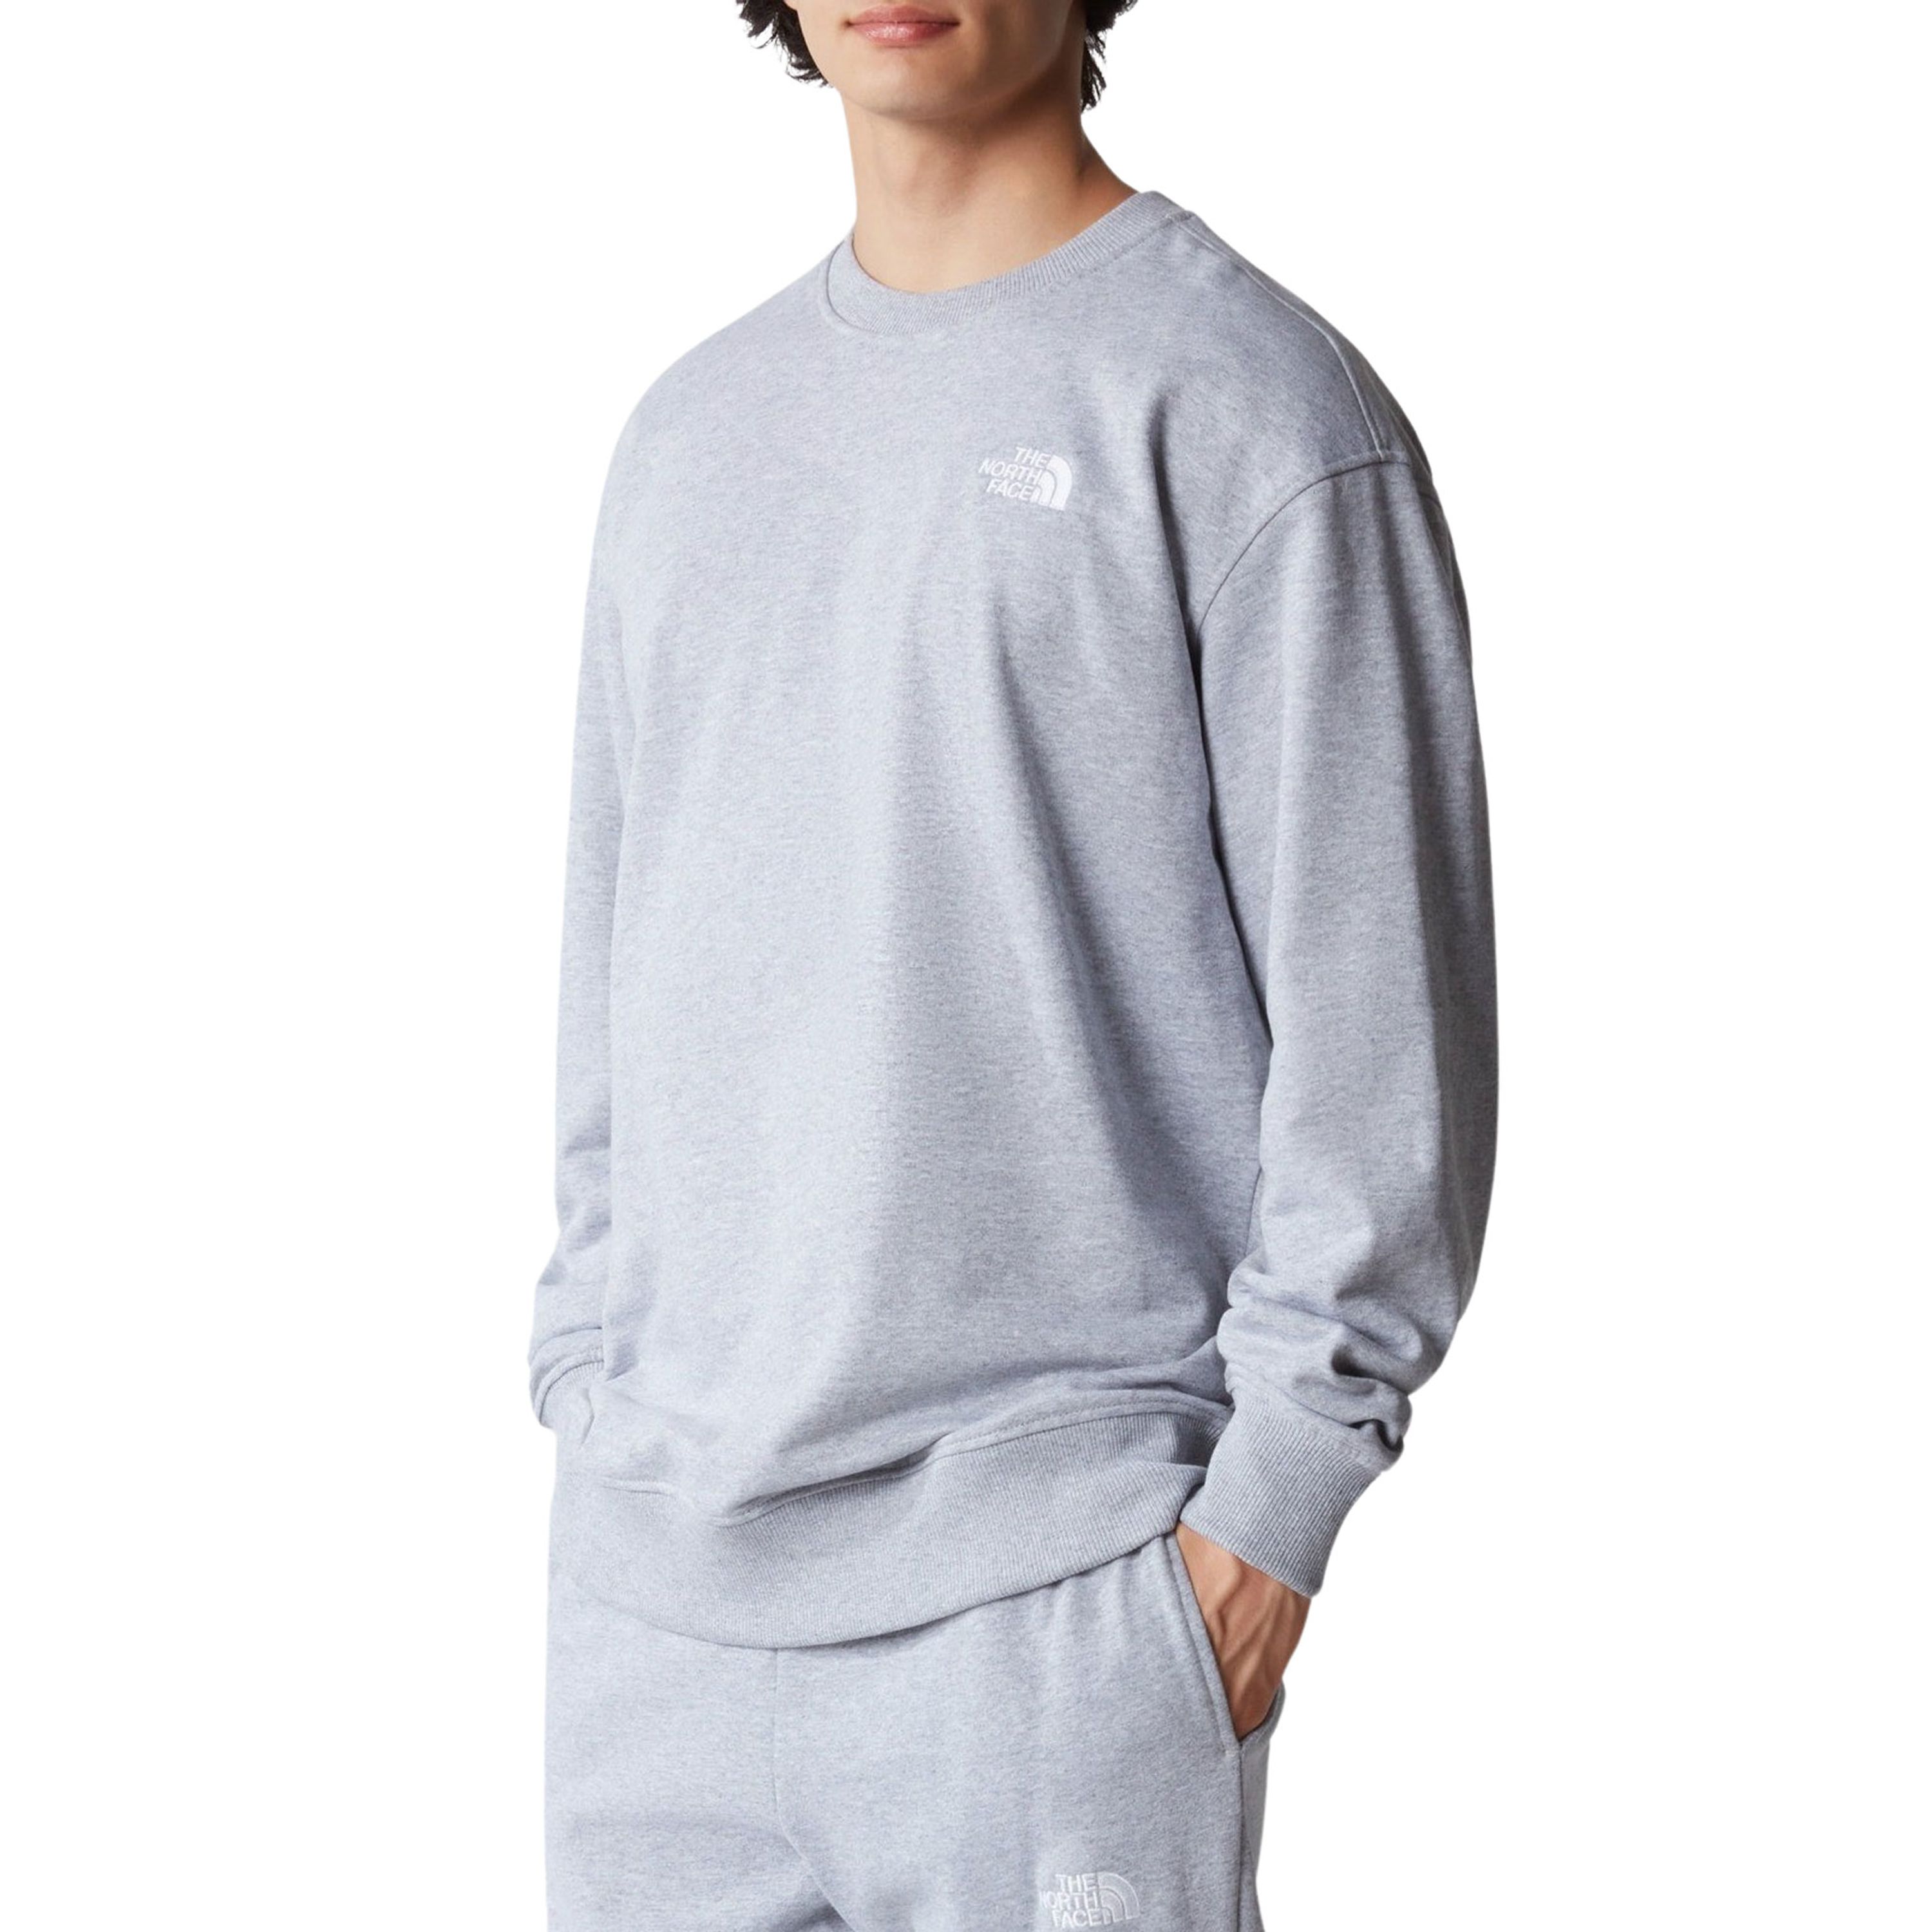 The North Face Essential Crew Sweater Heren